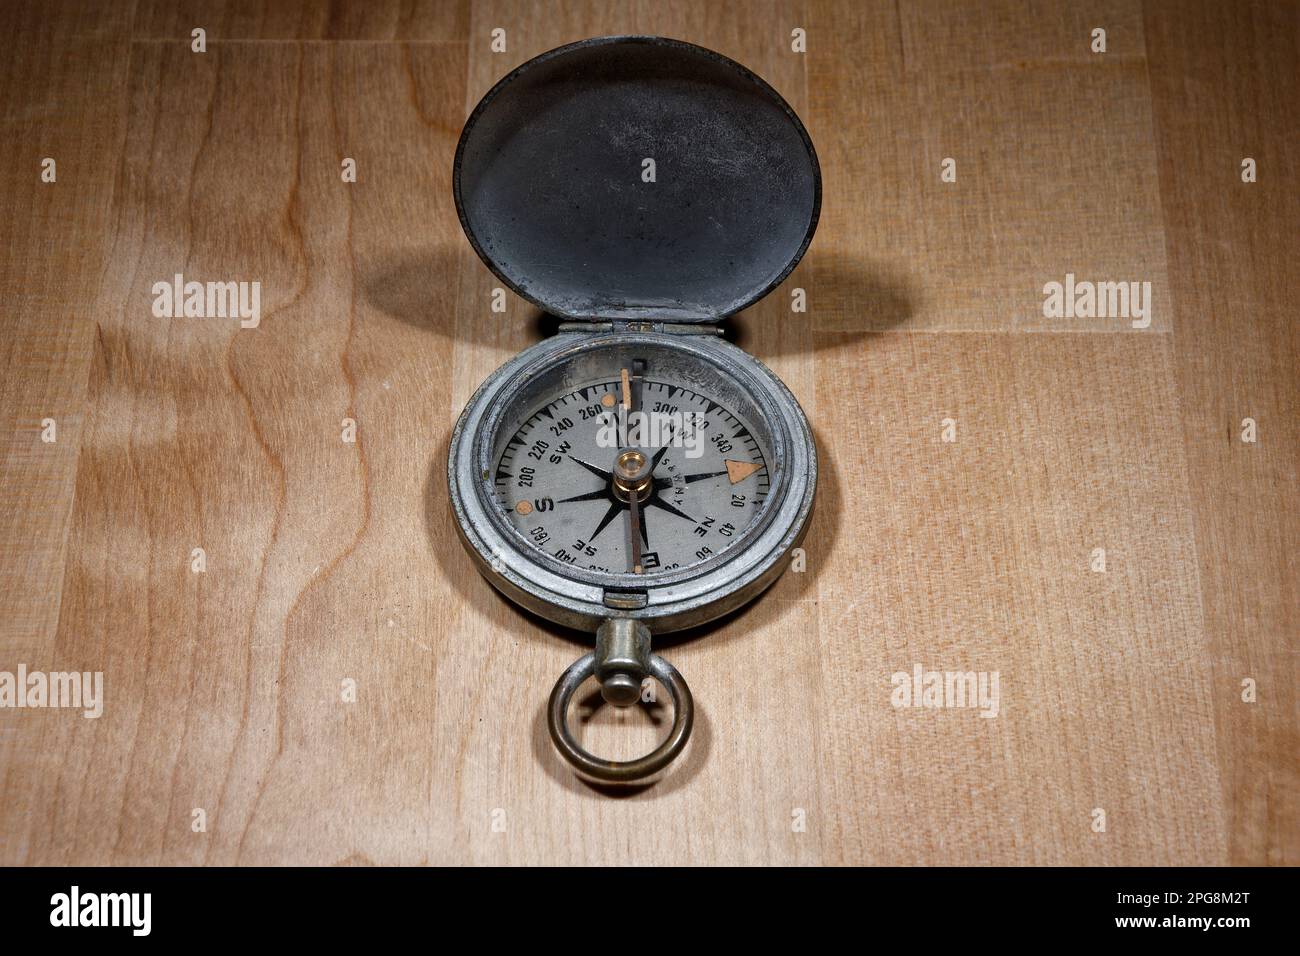 Open old vintage compass on wooden table Stock Photo